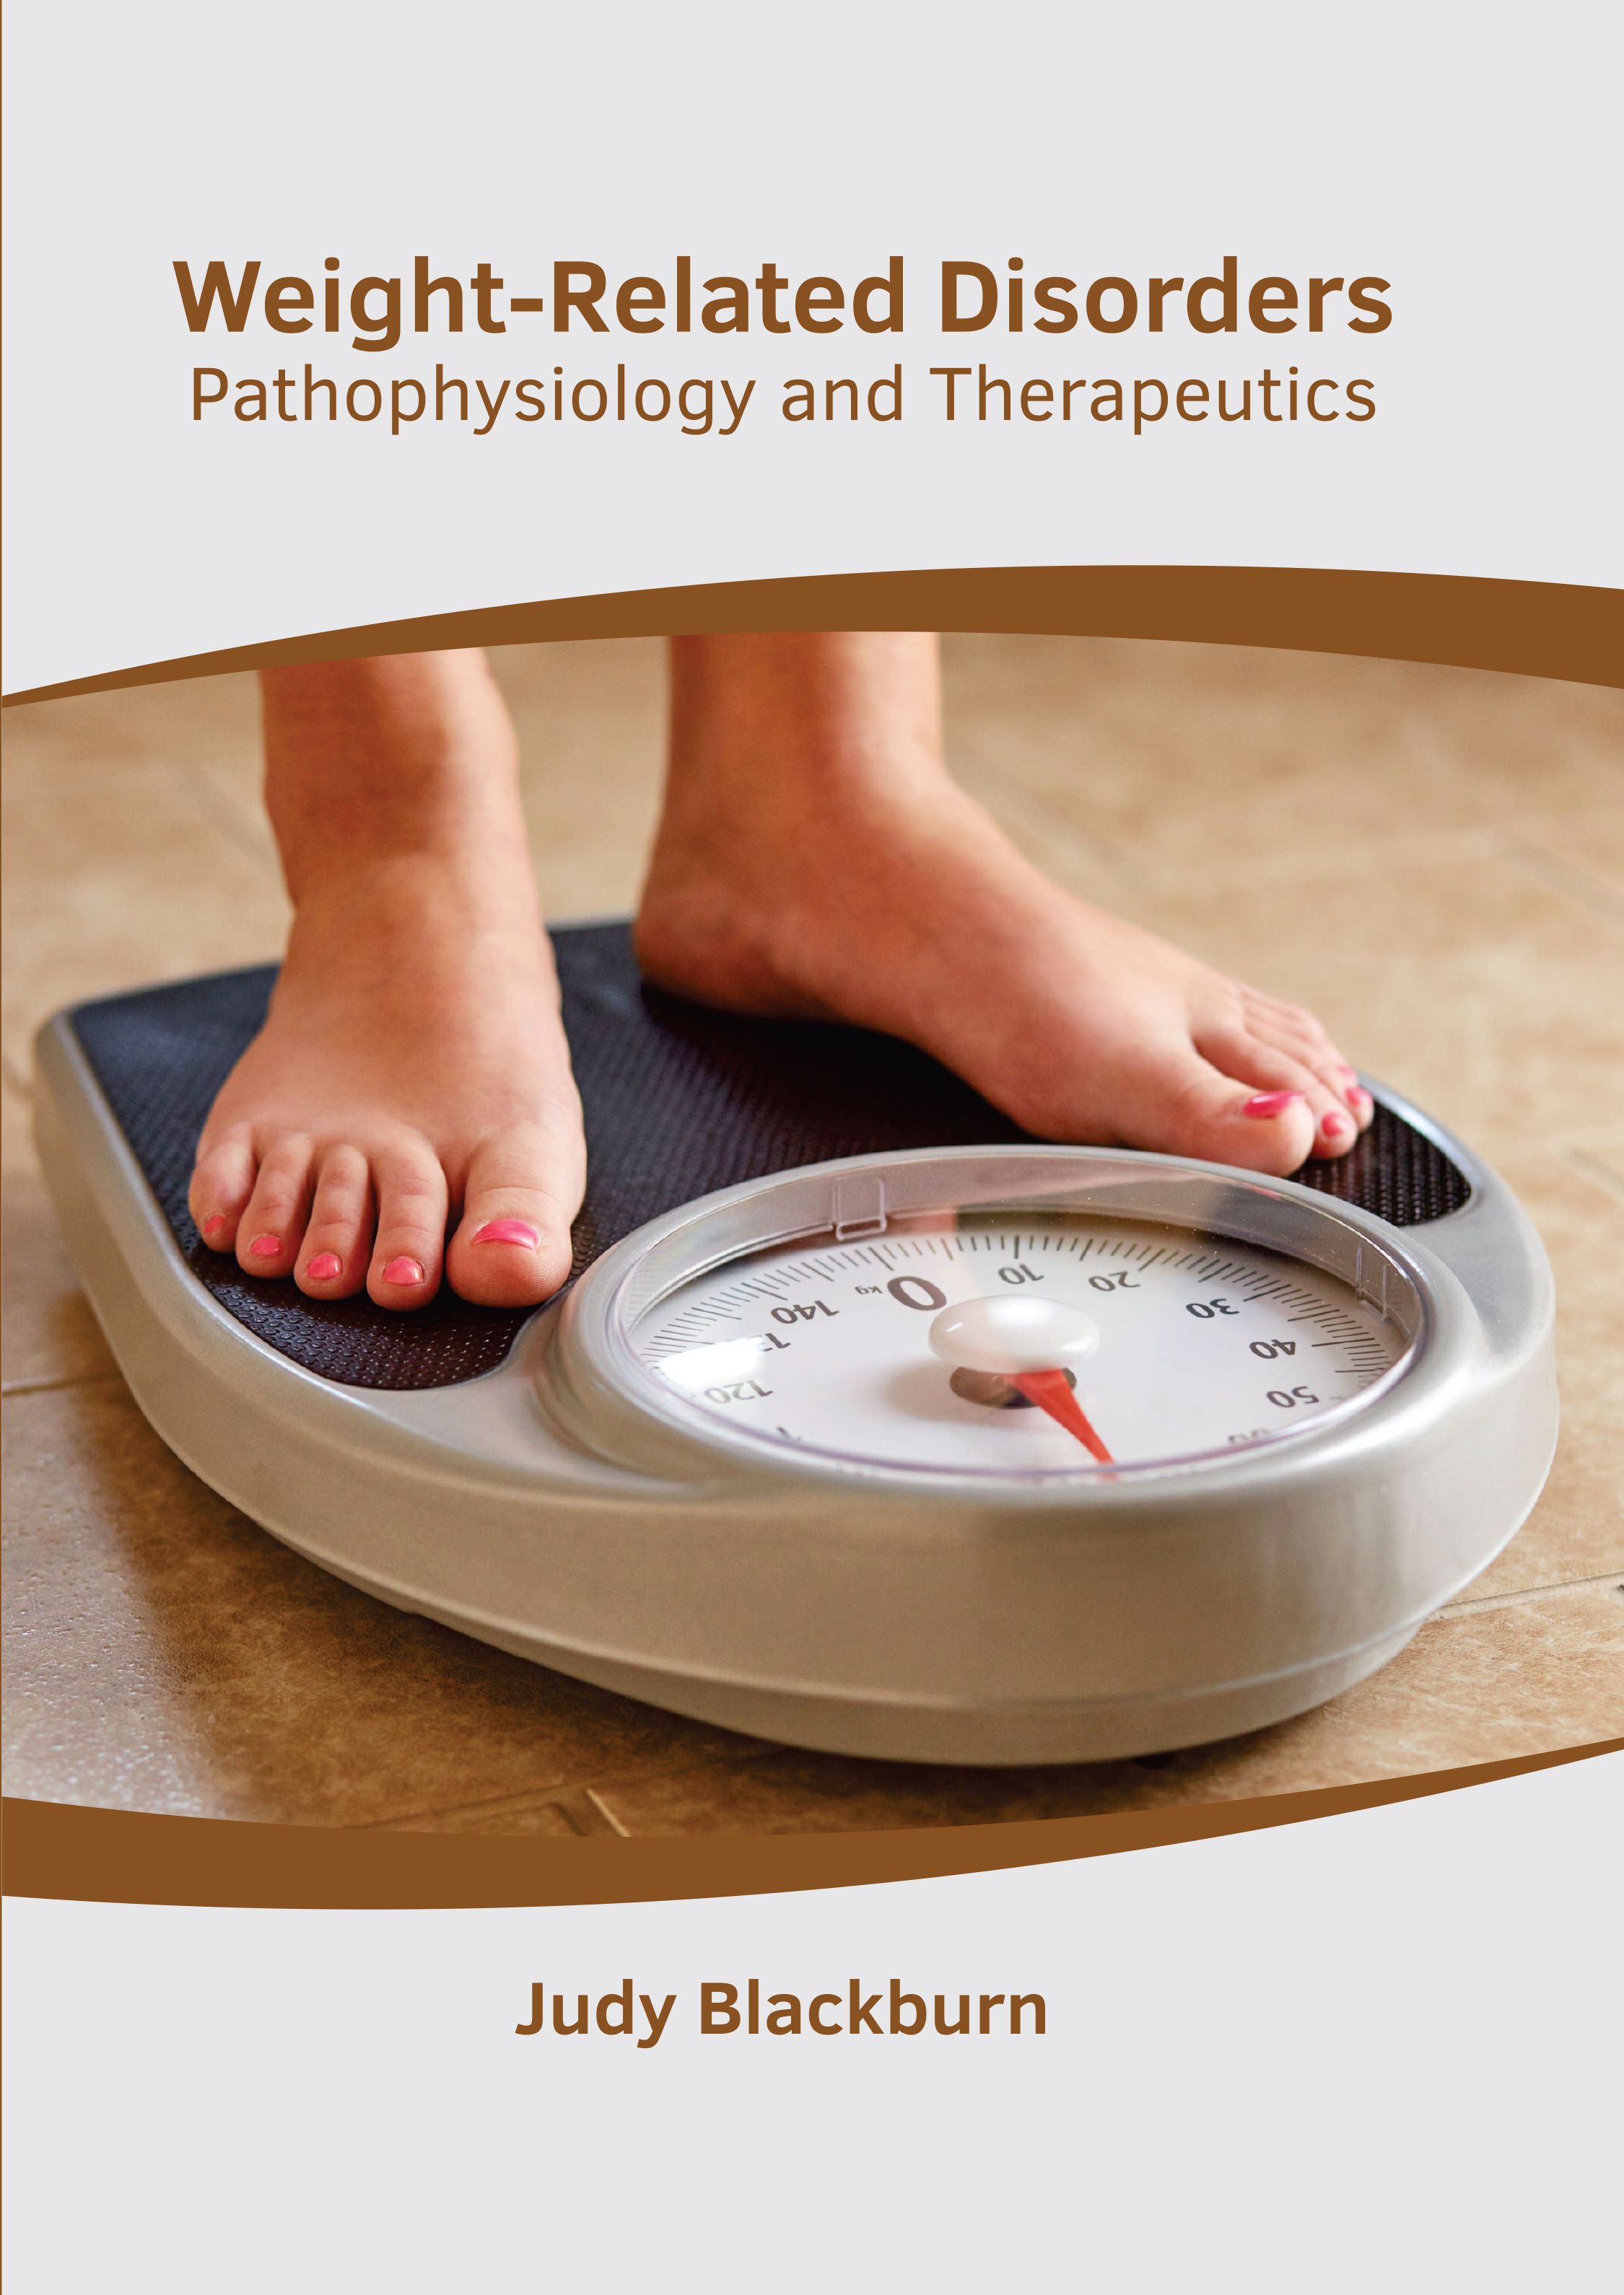 WEIGHT-RELATED DISORDERS: PATHOPHYSIOLOGY AND THERAPEUTICS